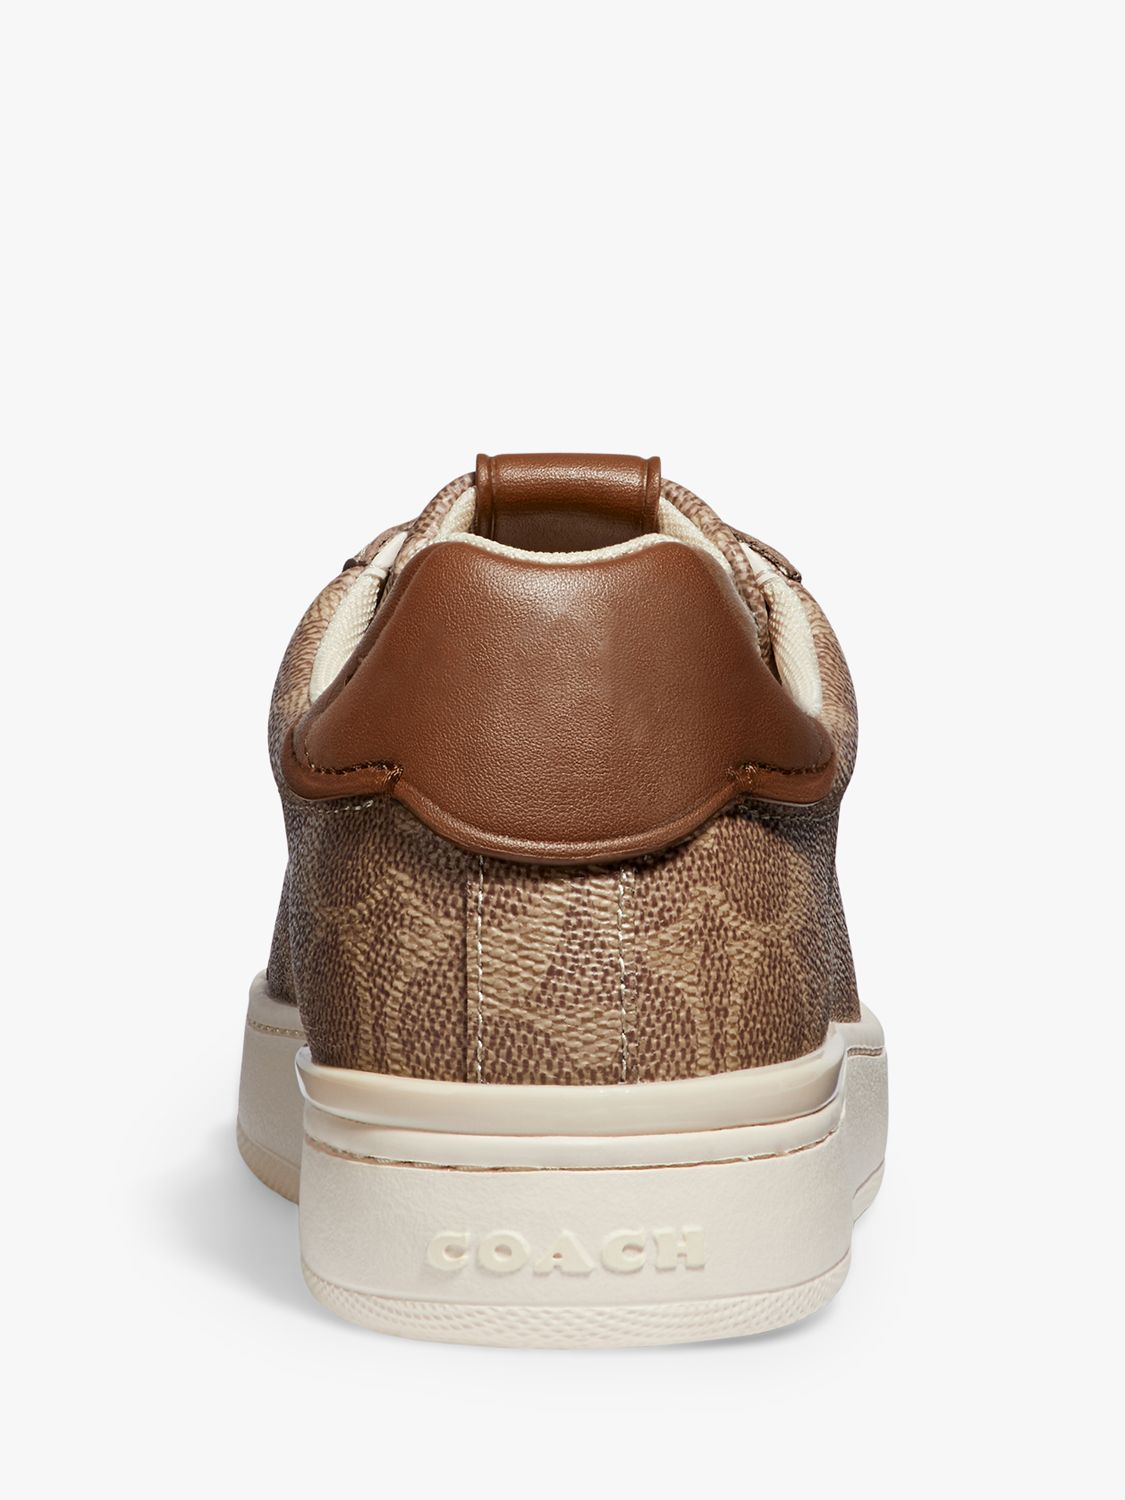 Coach Lowline Logo Lace Up Casual Shoes, Tan at John Lewis & Partners